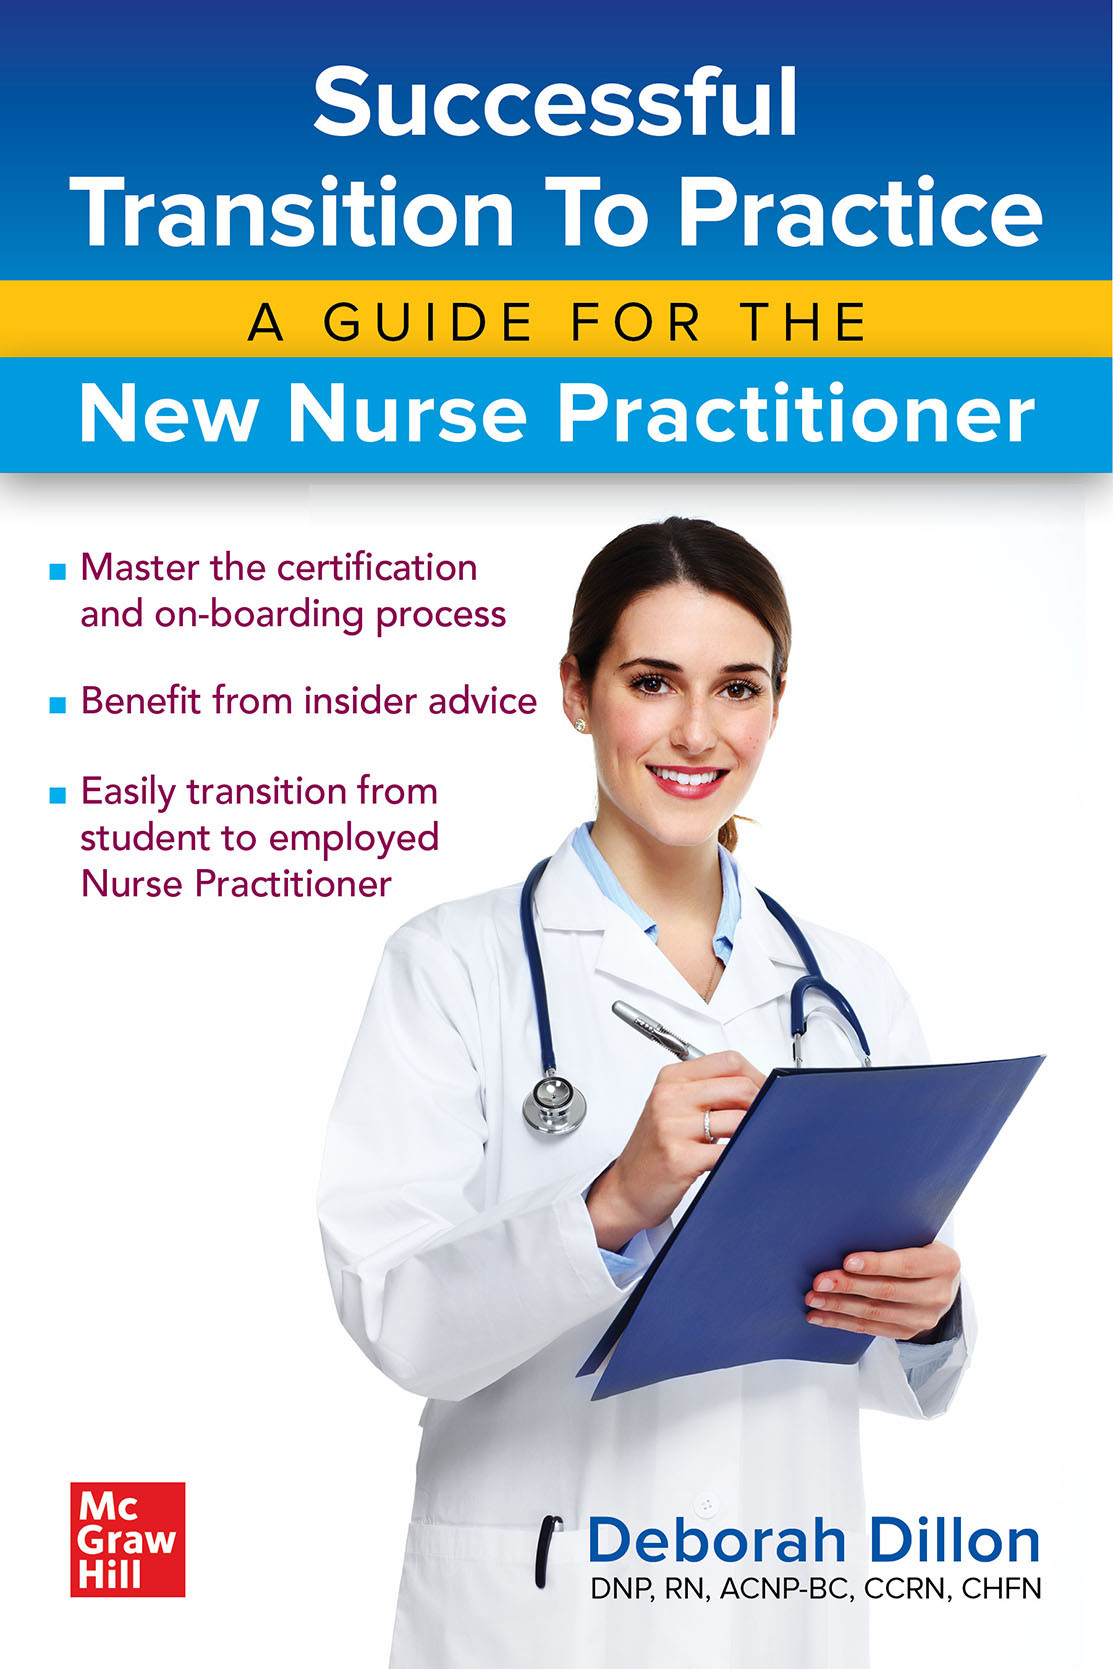 Successful Transition to PracticeA Guide for New Nurse Practitioner